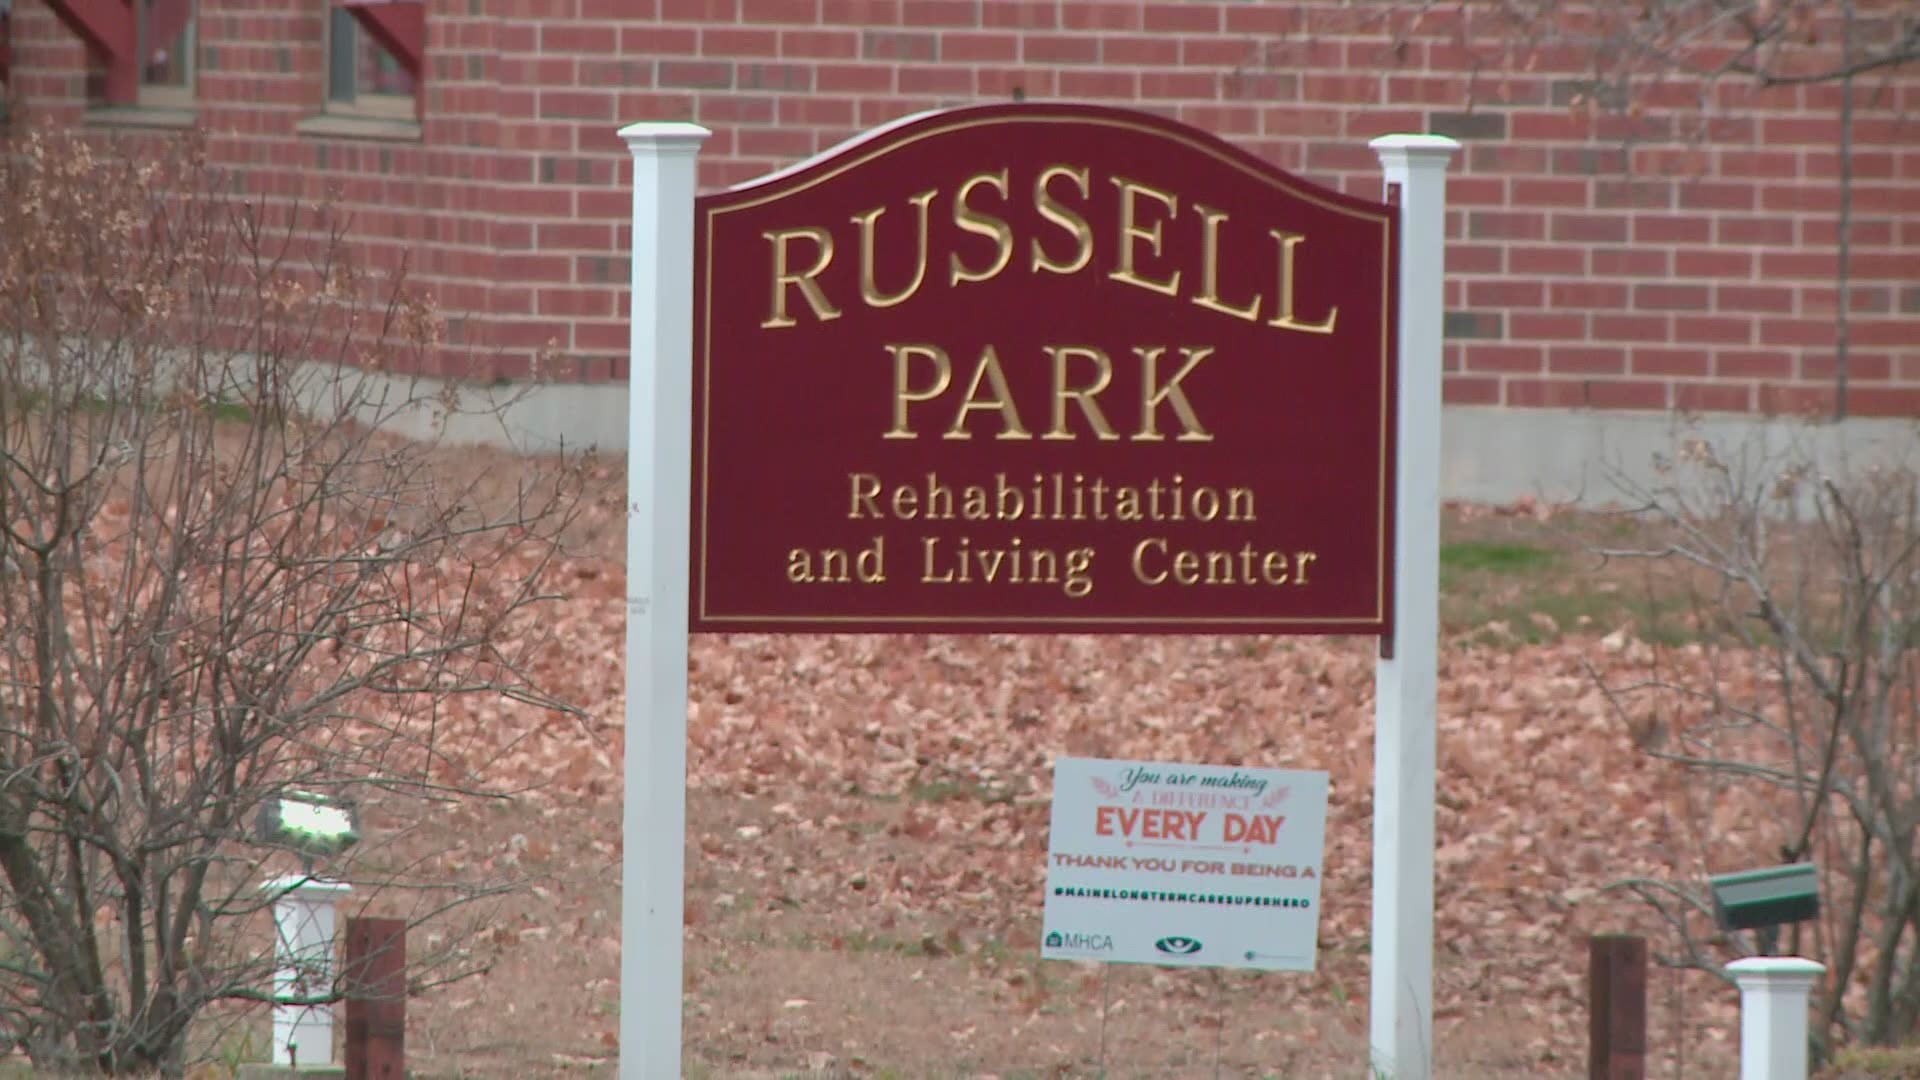 Three deaths from the coronavirus are now linked to an outbreak at the Russell Park Rehabilitation and Living Center in Lewiston.